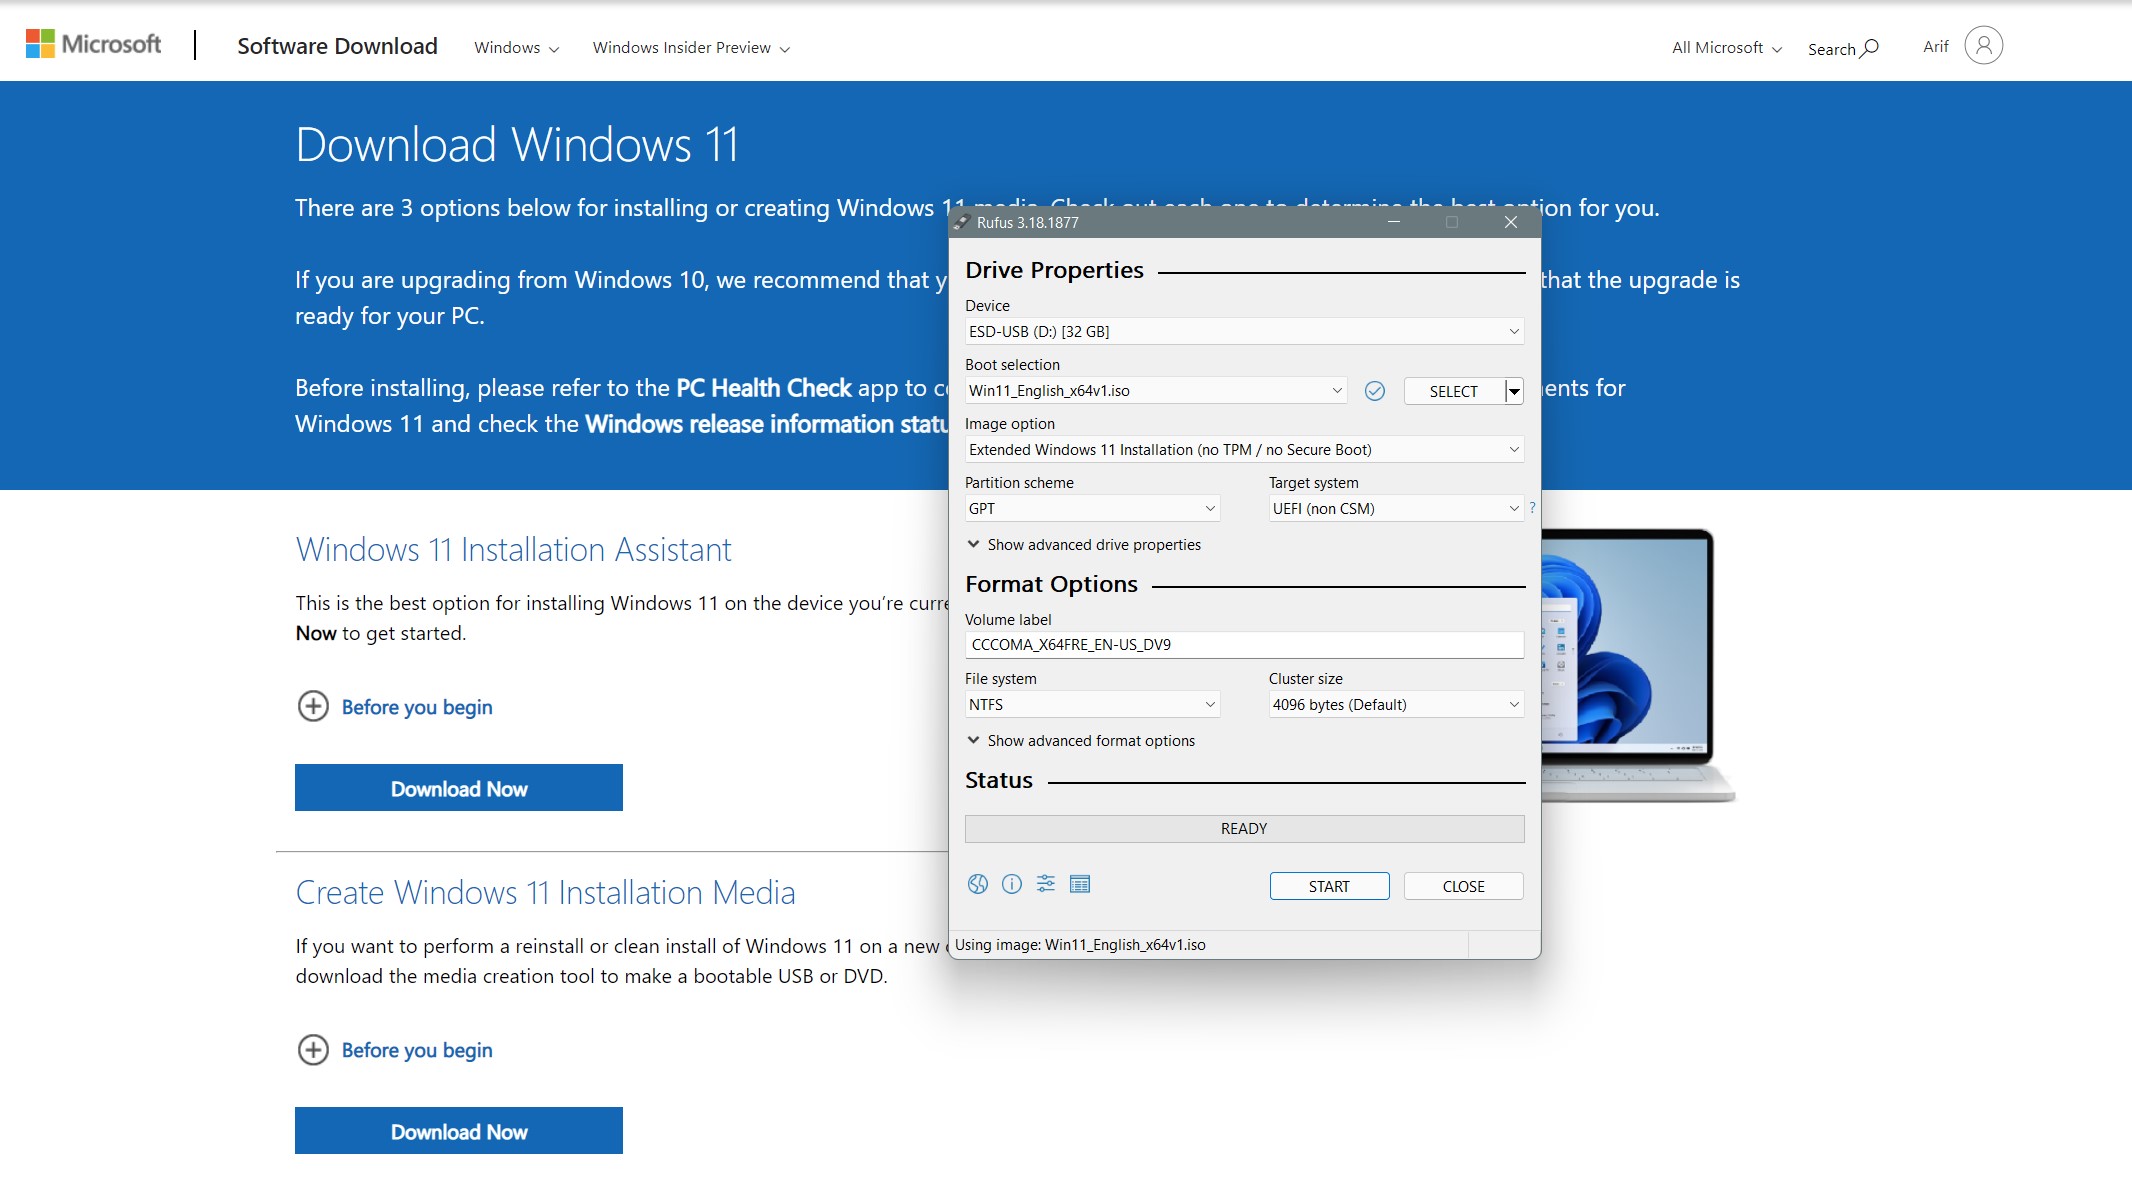 Windows 11 Download, Upgrade to the New Windows 11 OS